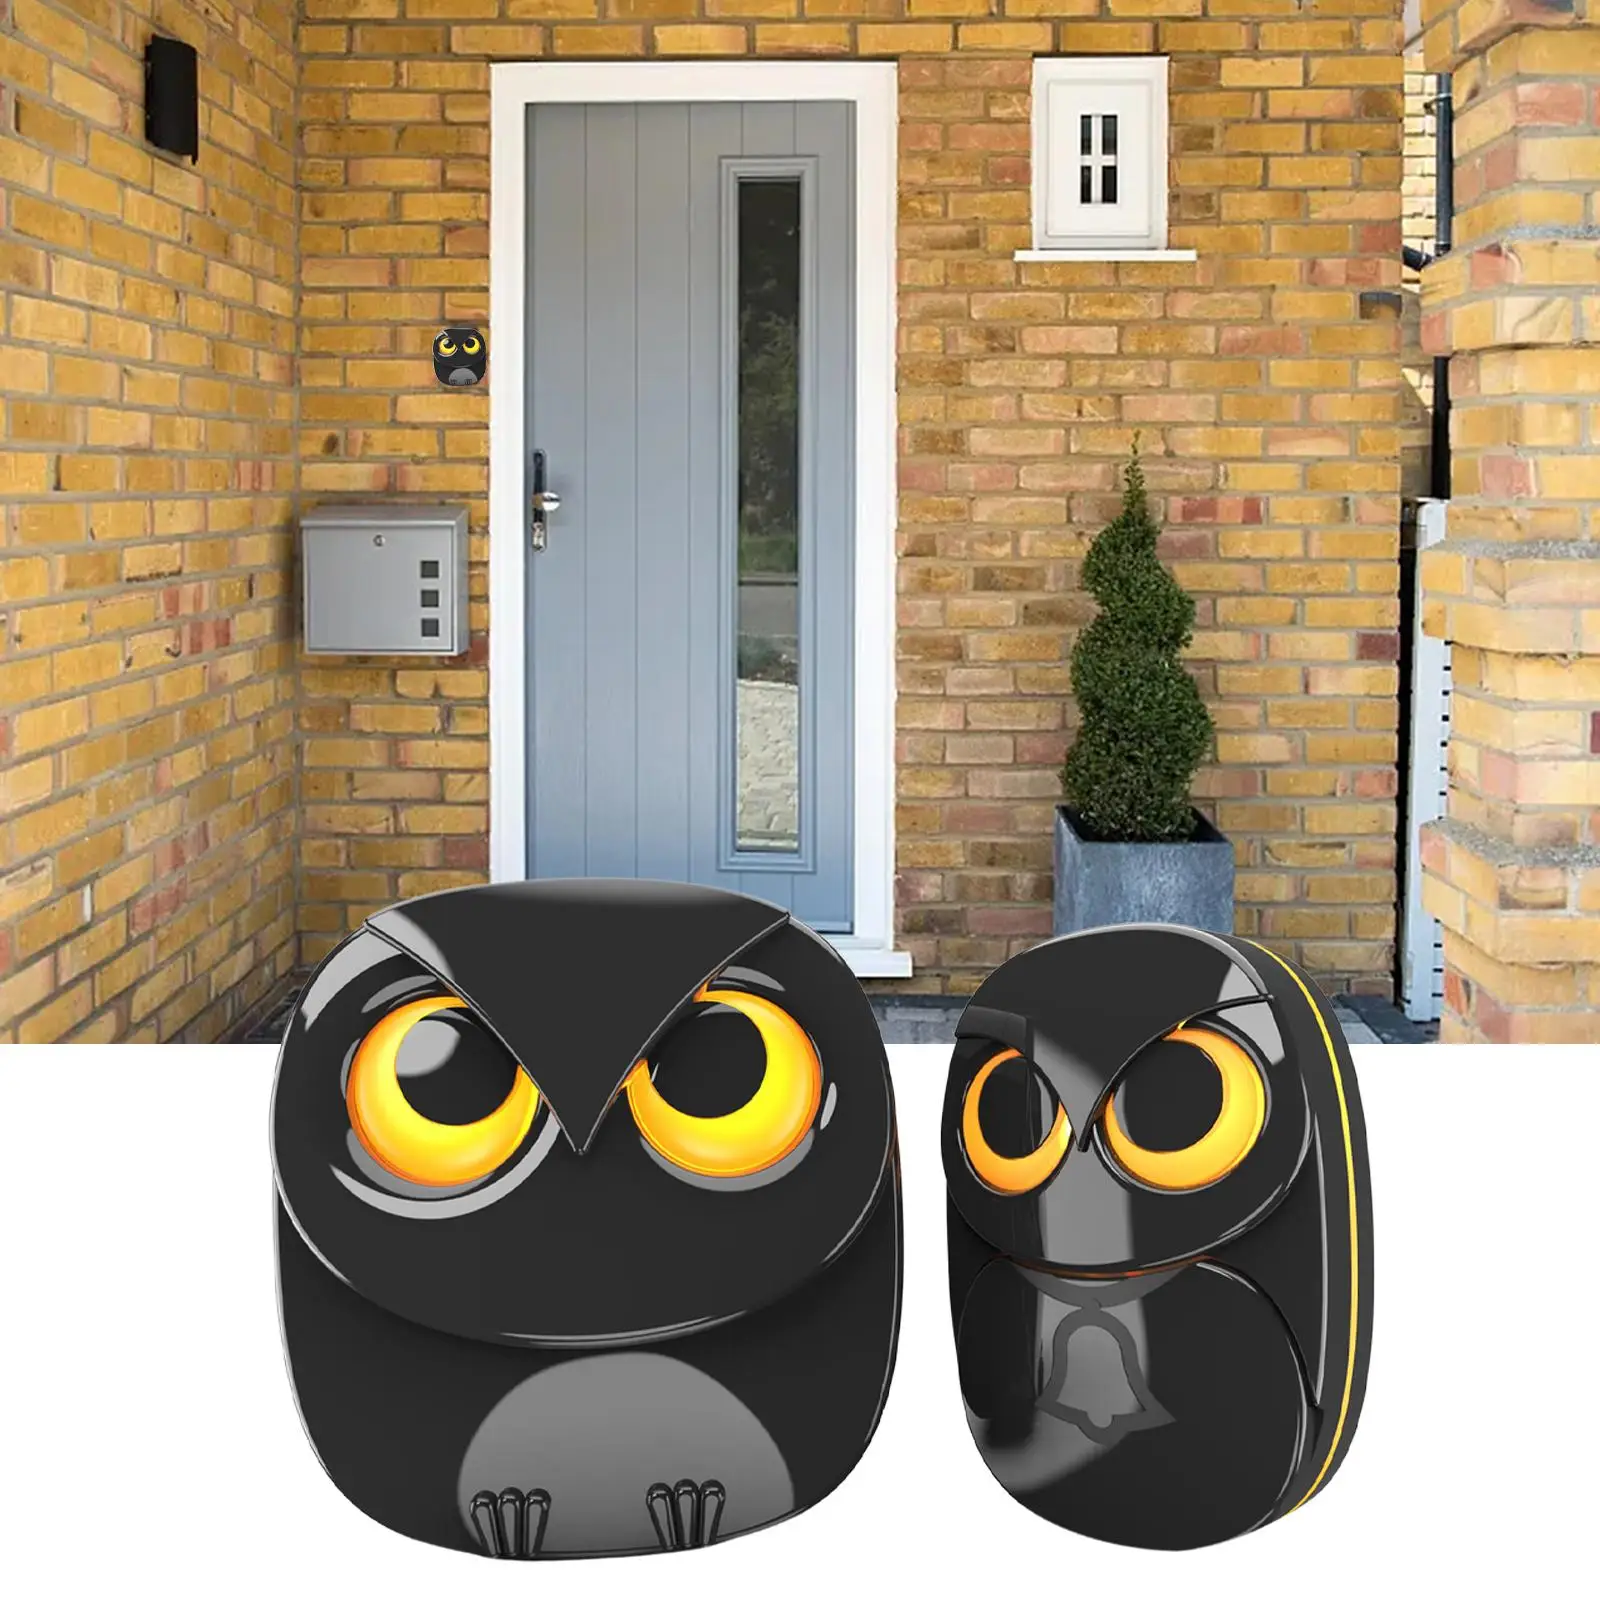 Wireless Driveway Security Alarm Easy Installation Equipment Multi Use Doorbell for Front Porch Garage Office US Plug